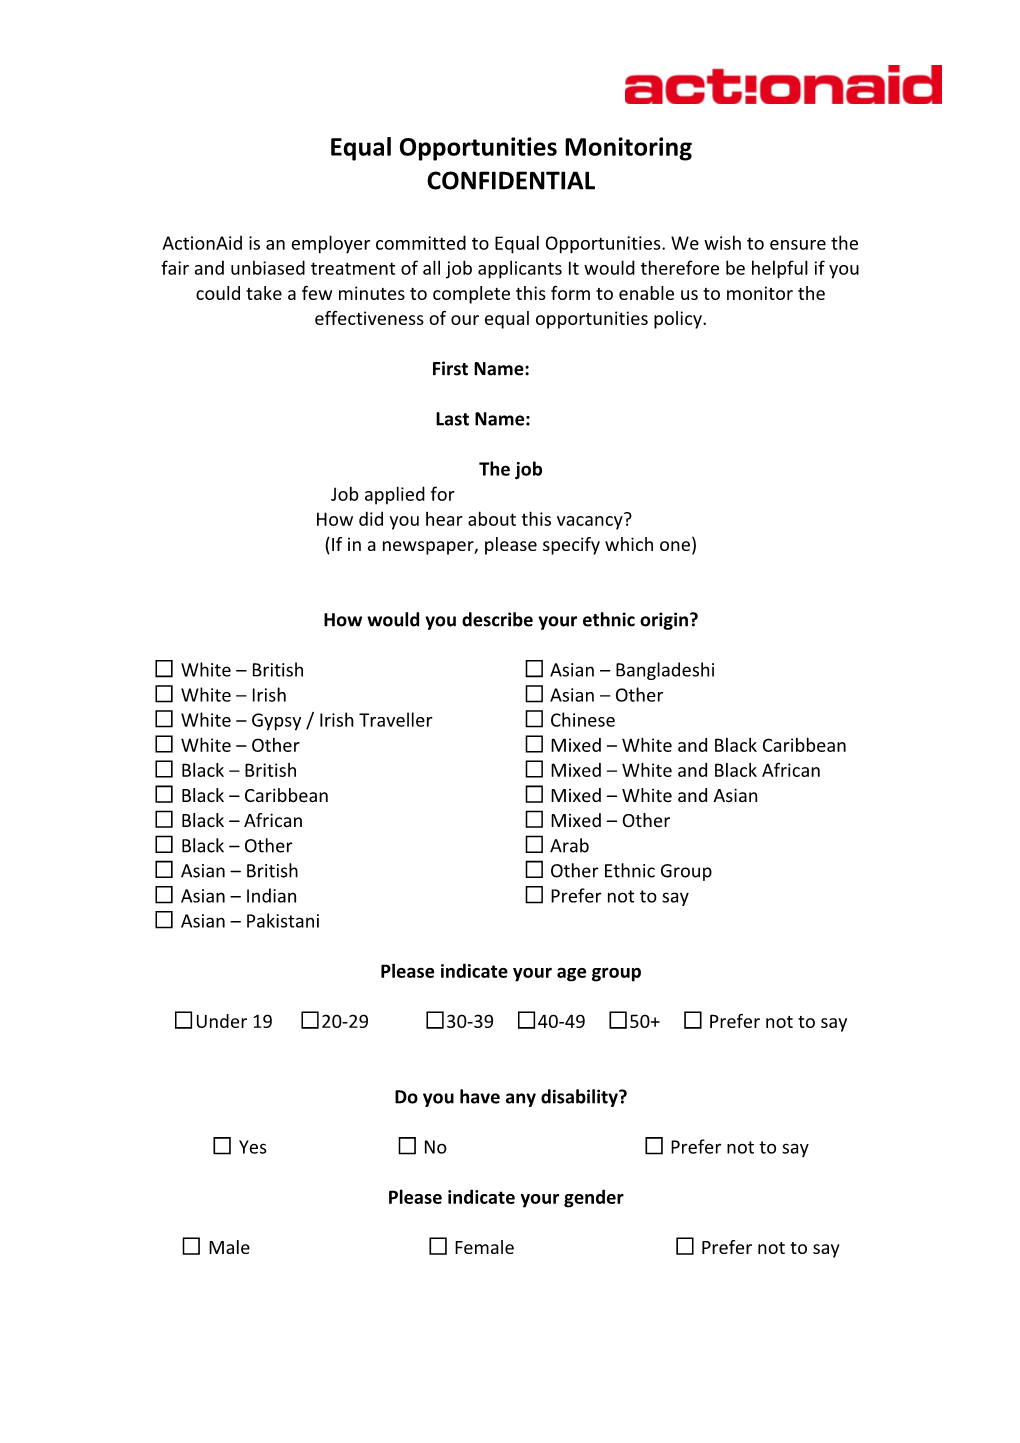 Equal Opportunities Monitoring Form 2012